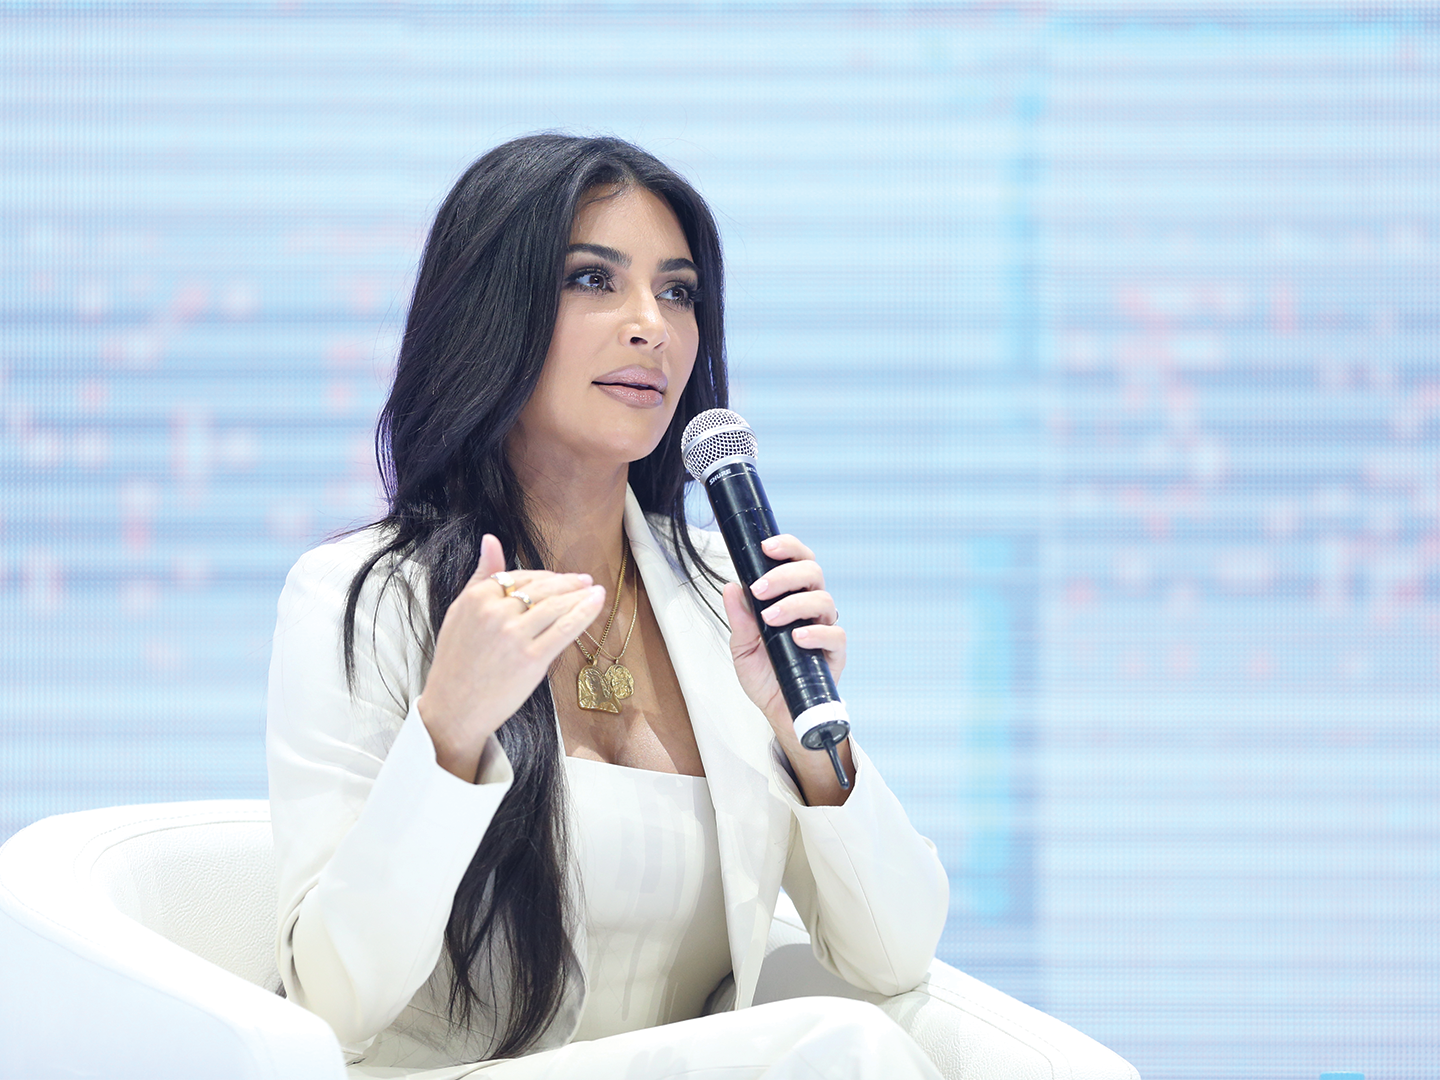 Kim Kardashian West spoke on a panel titled “Marketplace of Ideas” about harnessing technology to promote personal brands and businesses.